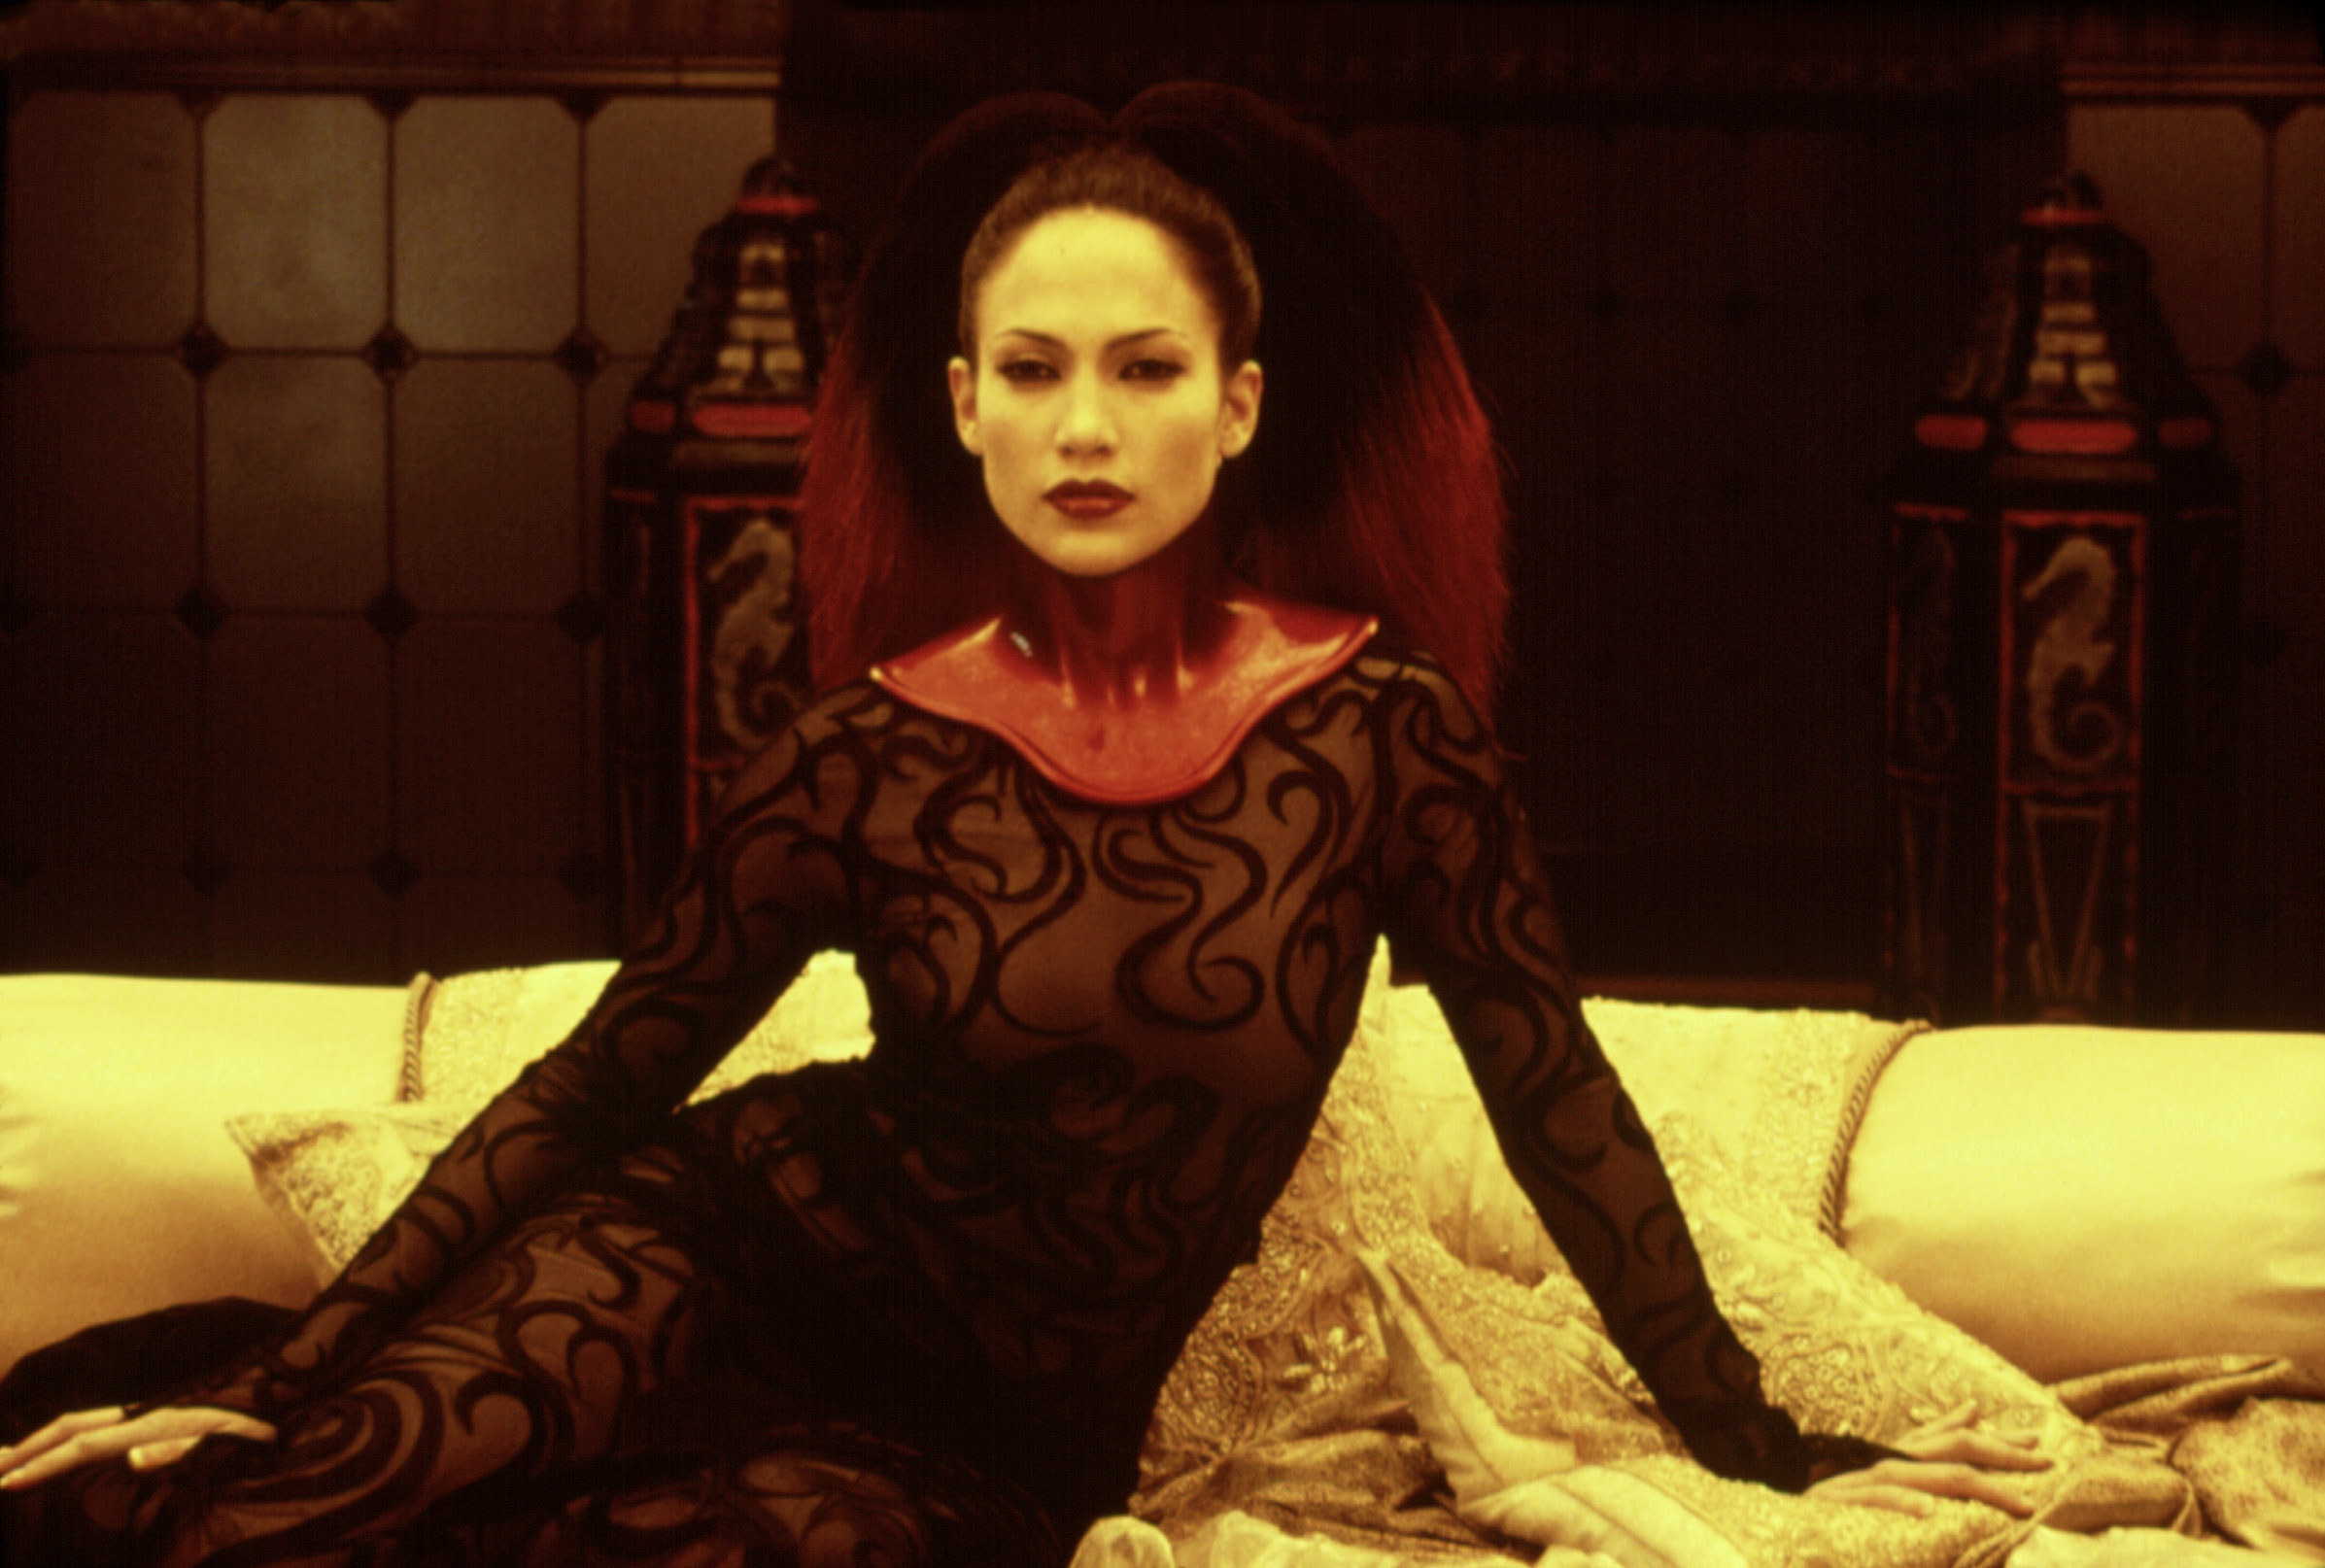 Jennifer Lopez in an ornate bodysuit and red leather collar lounging on a bed